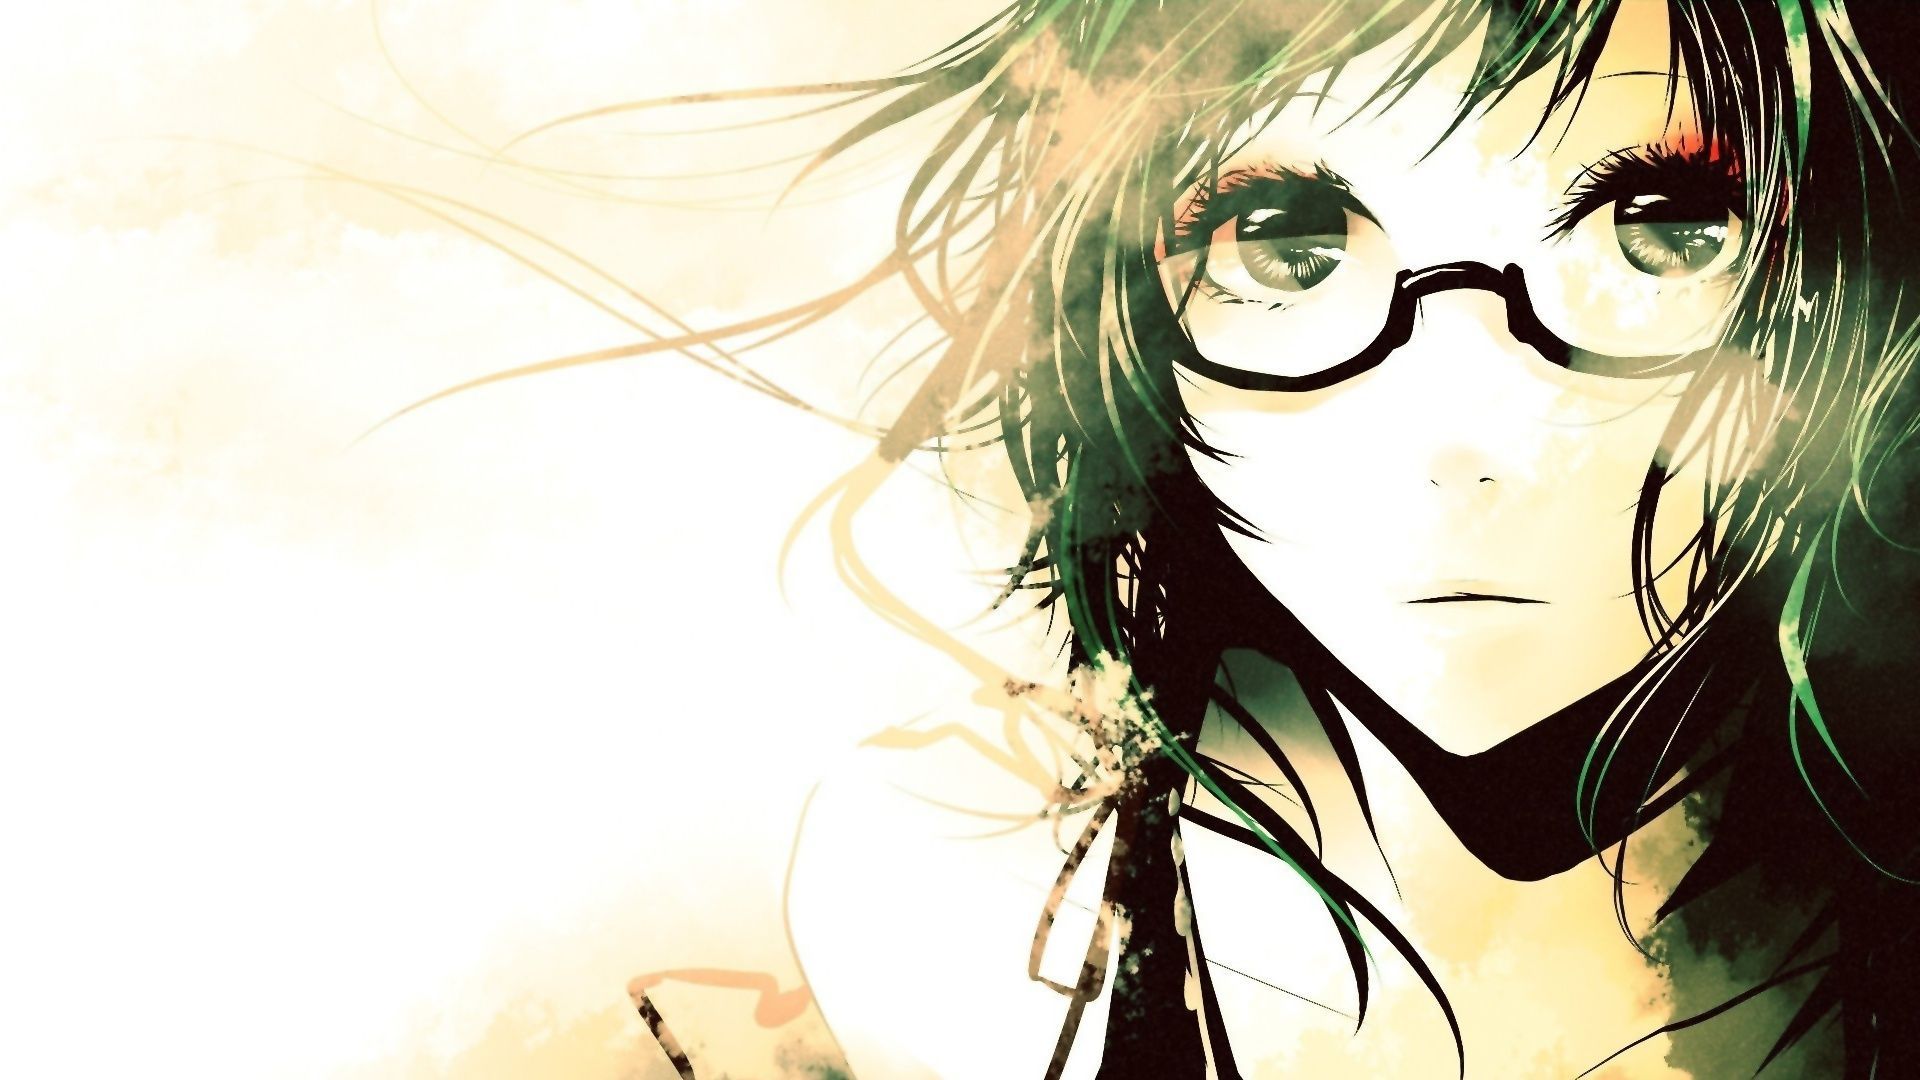 Anime Wallpaper High Definition 362 - HD Wallpapers Site